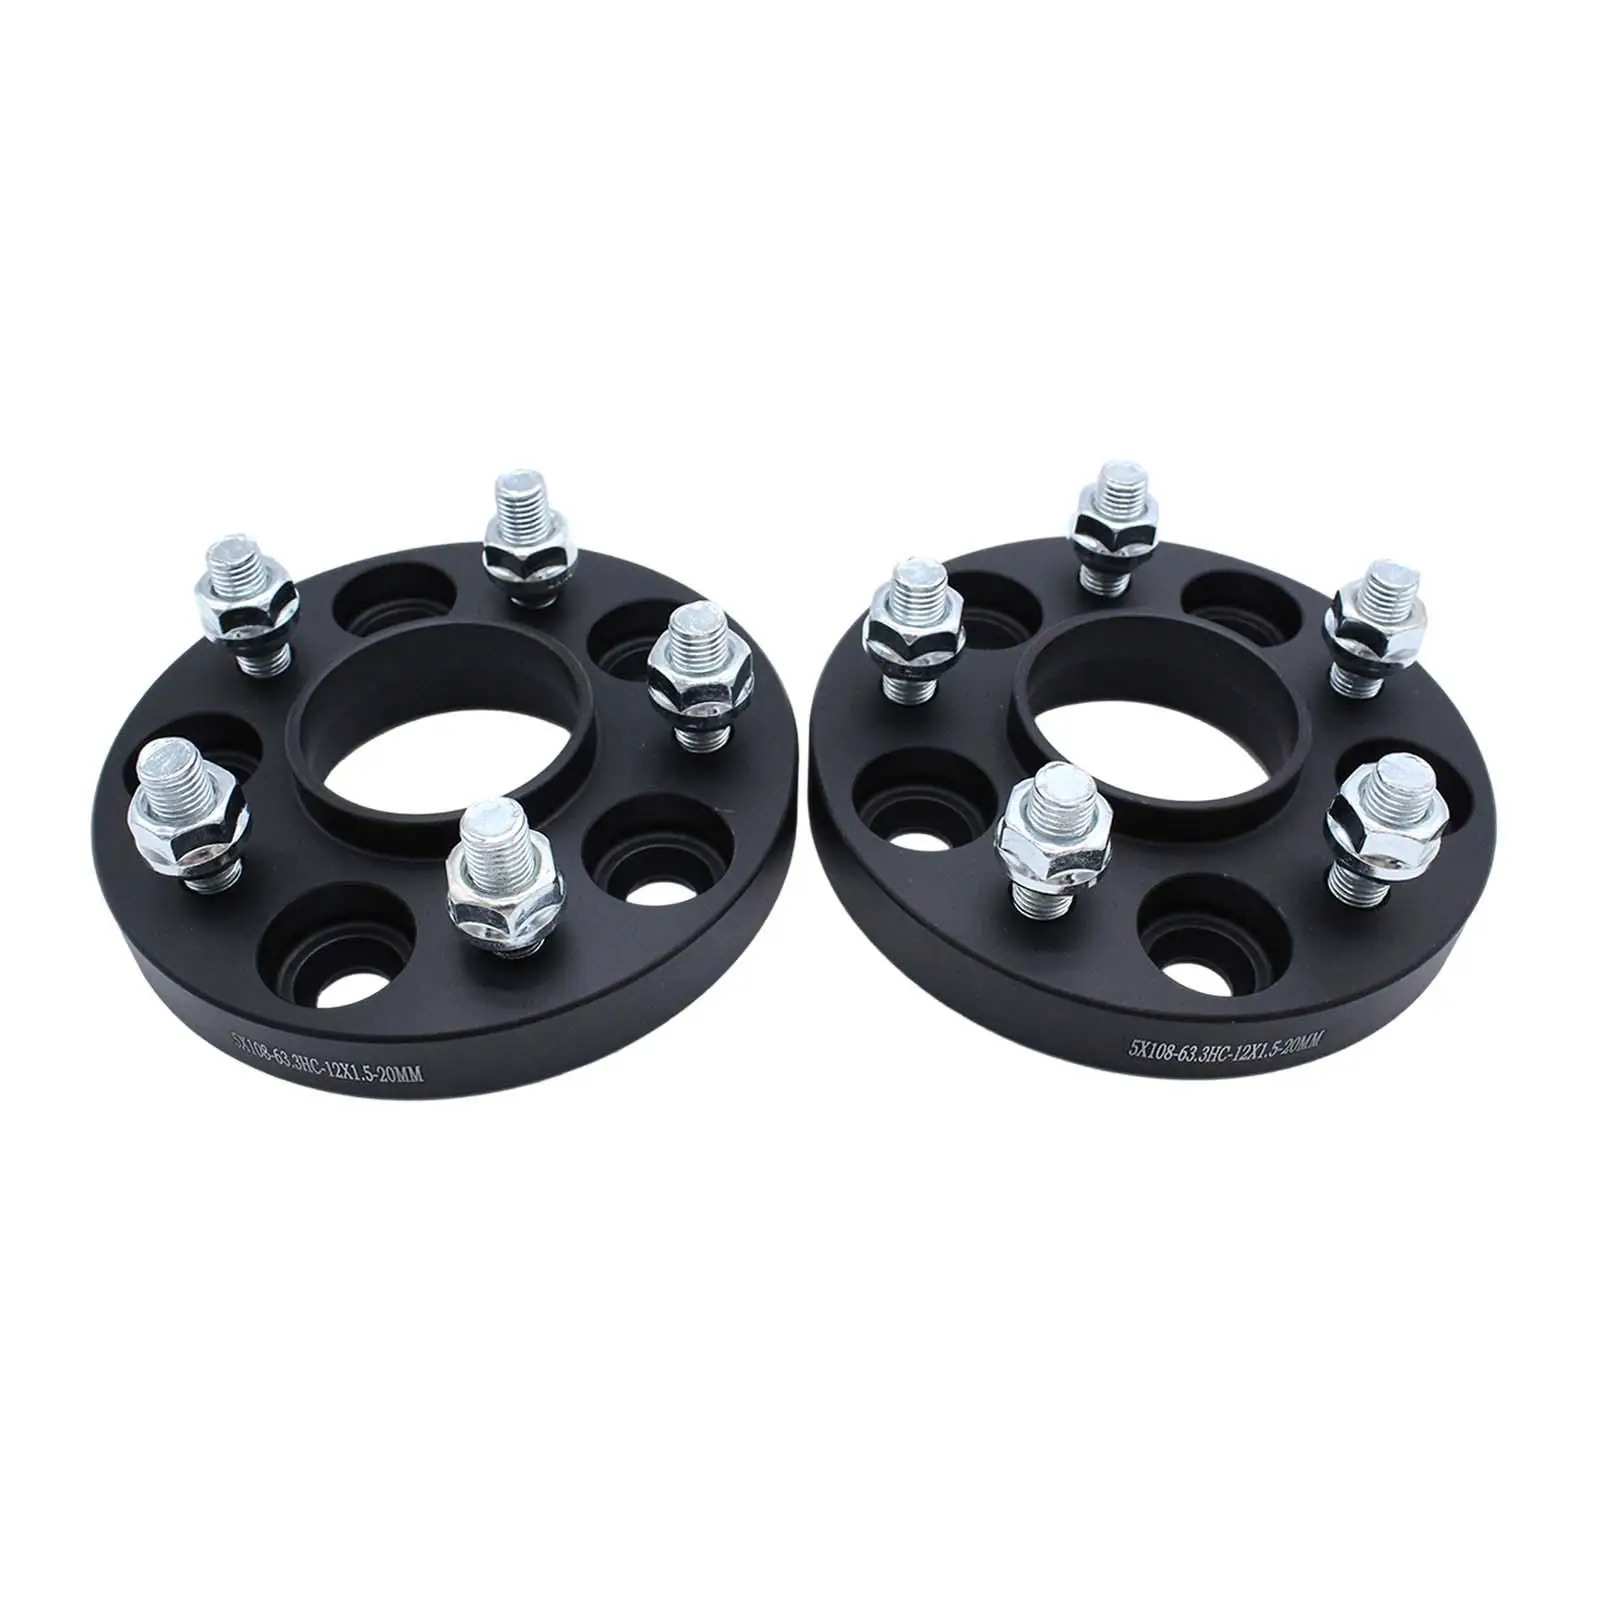 2 Pieces Hubcentric Wheel Spacers Wheel Adapters Spacers for Ford MK3 2011-2018 MK2 2005-2011 Automotive Accessories